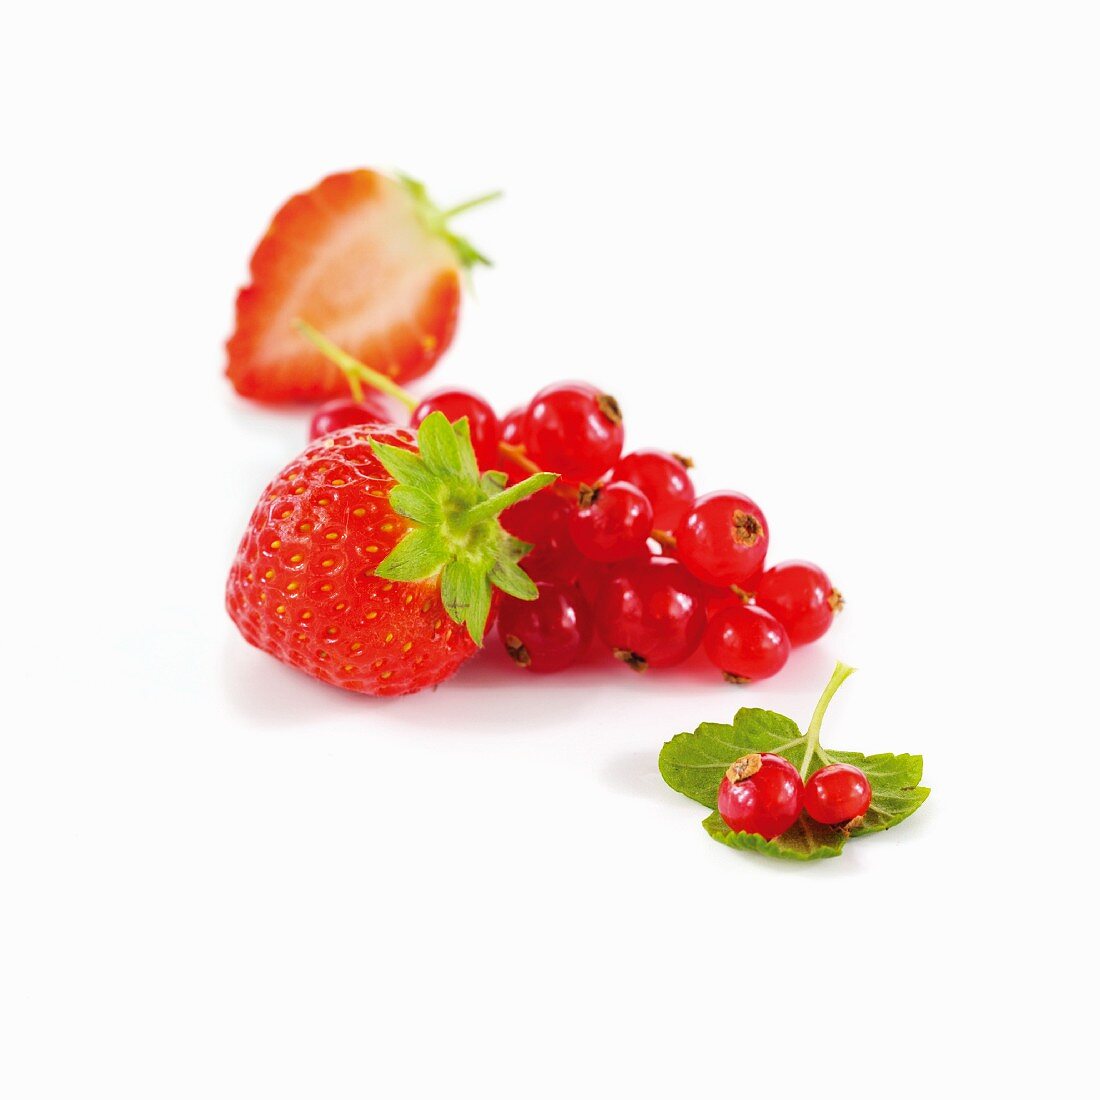 Strawberries and redcurrants